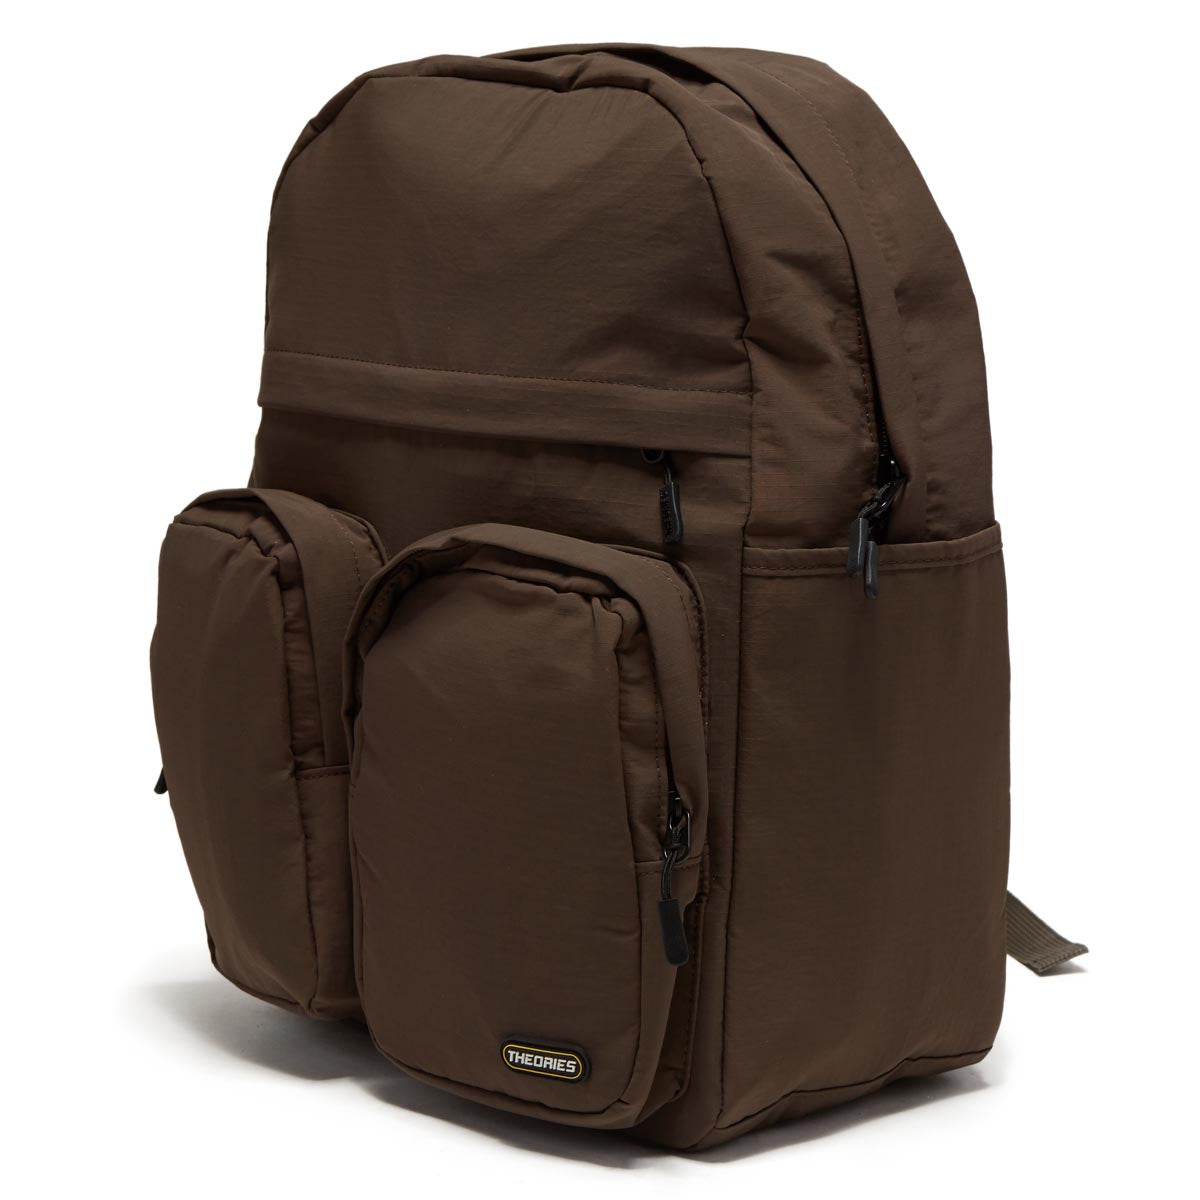 Theories Ripstop Trail Backpack - Brown image 3